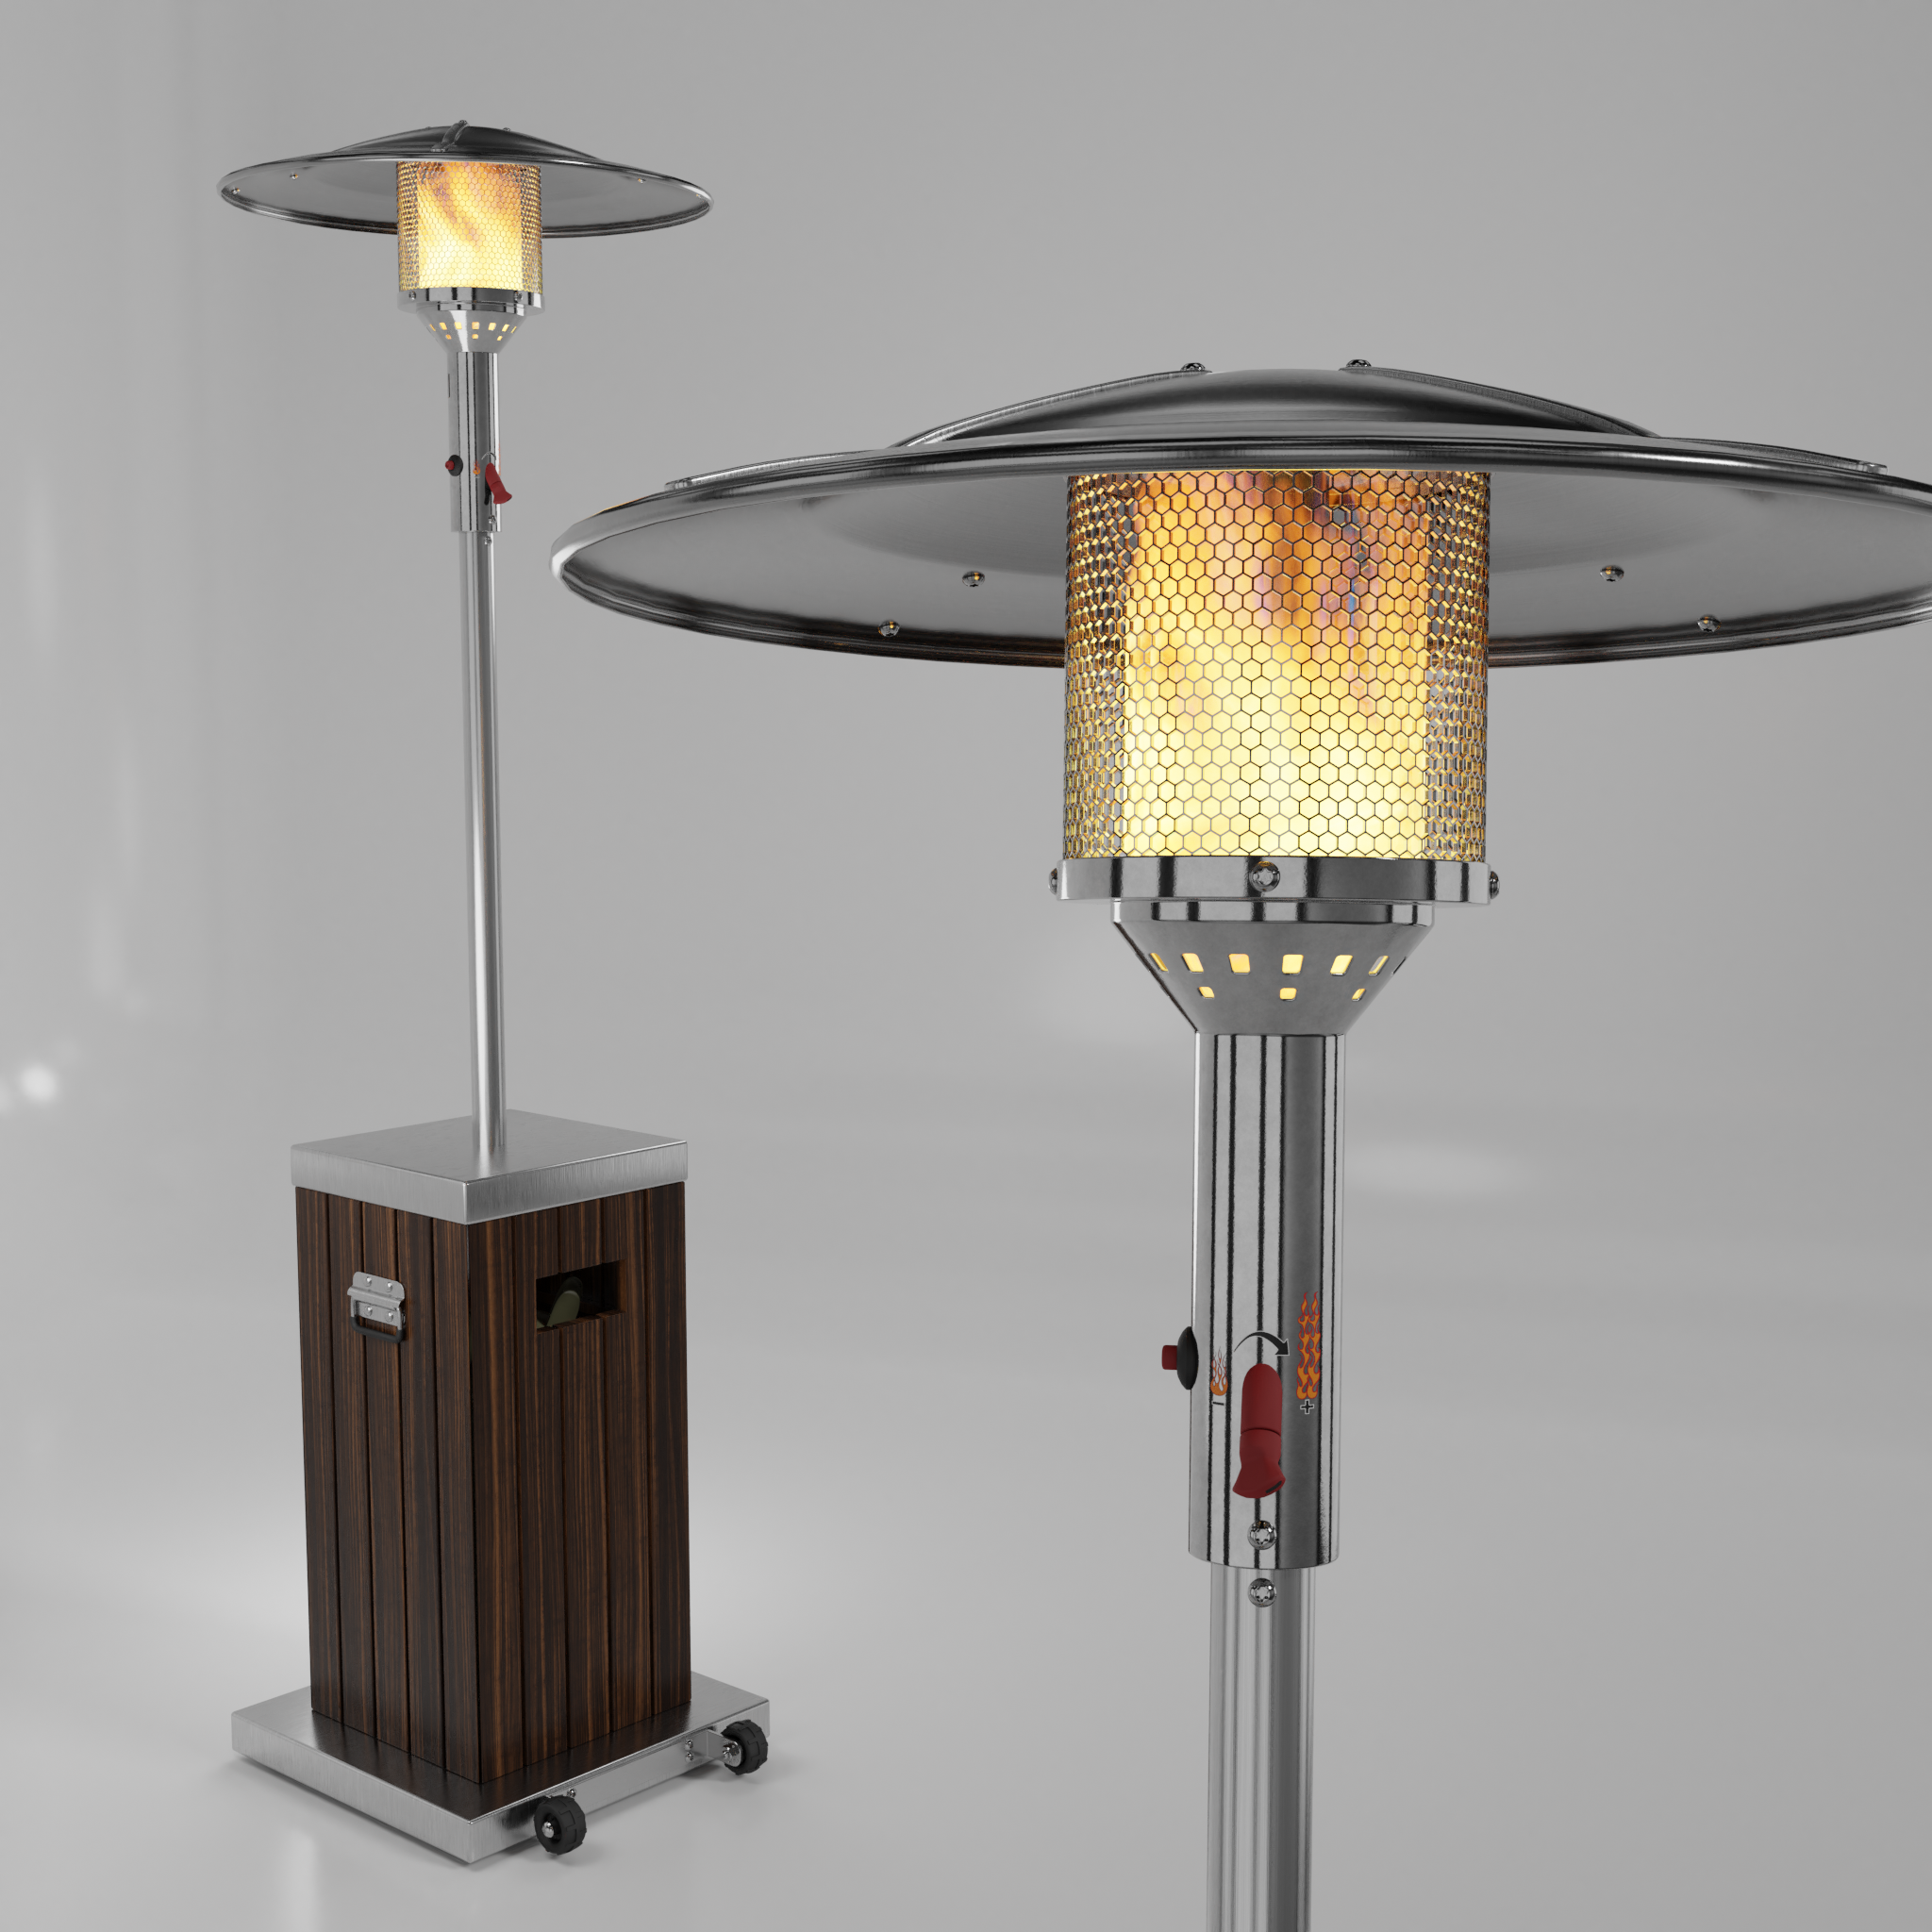 Gas Heater-Patio Heater preview image 1